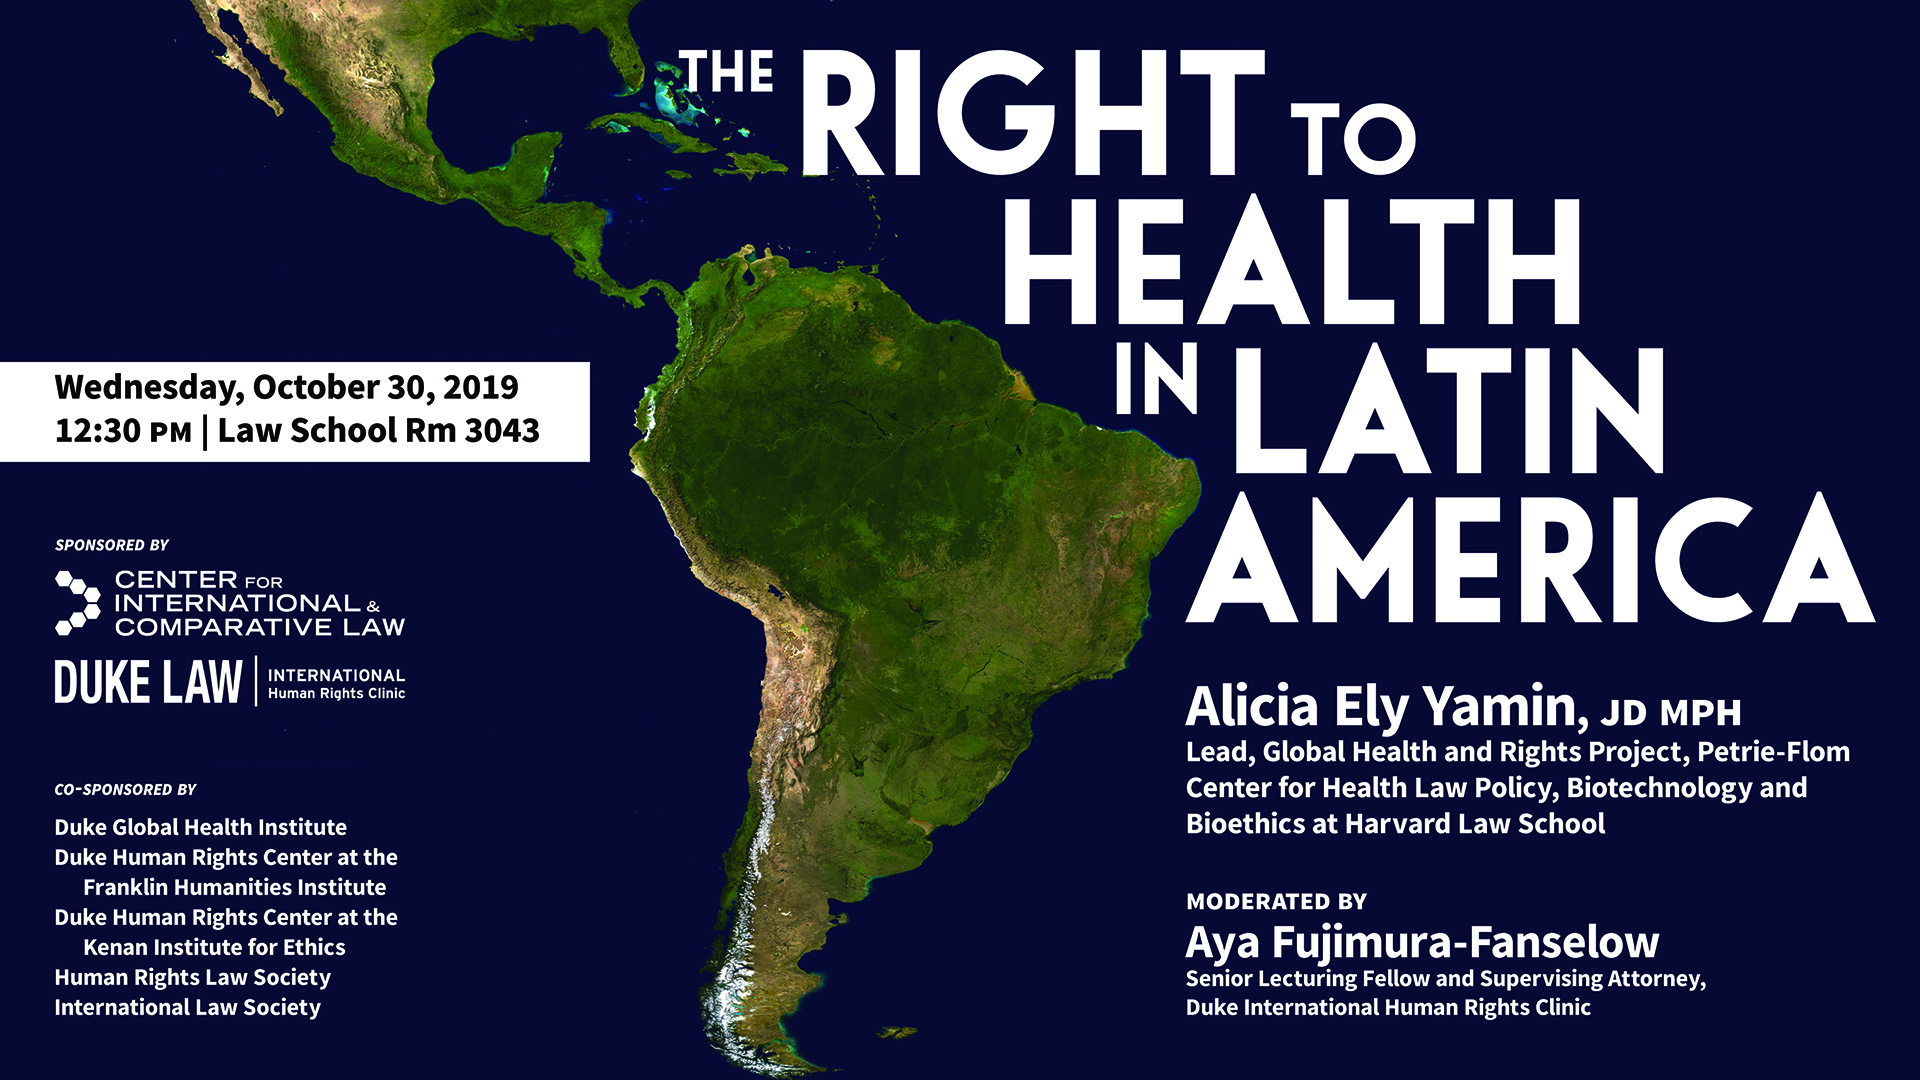 Human Rights in Practice: The Right to Health in Latin America, with Alicia Ely Yamin, JD MPH, on Wednesday, 30 October 2019, 12:30 p.m., in Room 3043 of Duke Law School